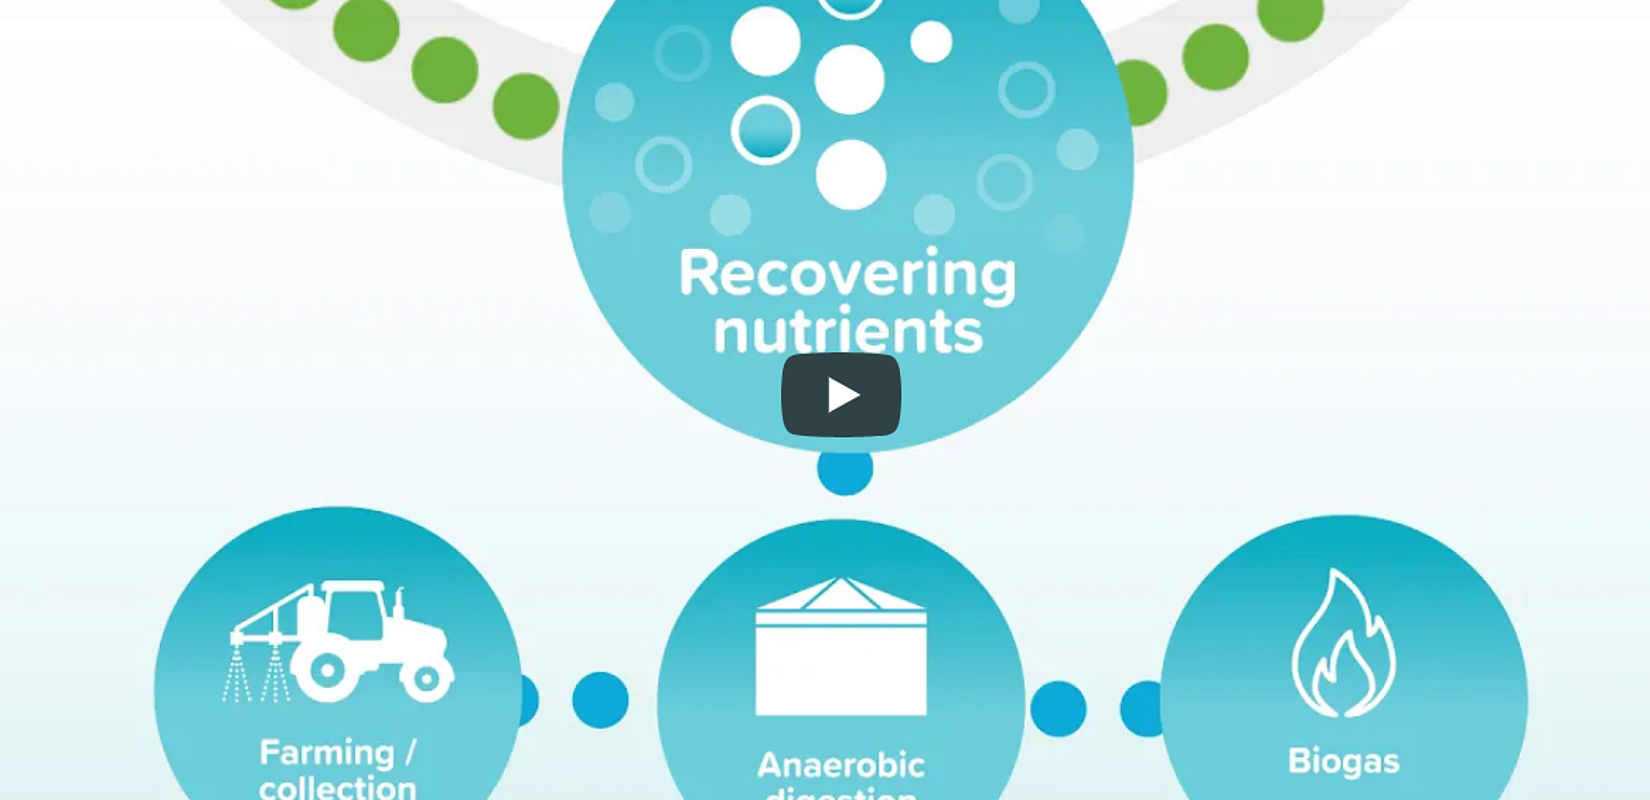 VIDEO: Nutrient Recovery by Southern Water at Nereus Peel